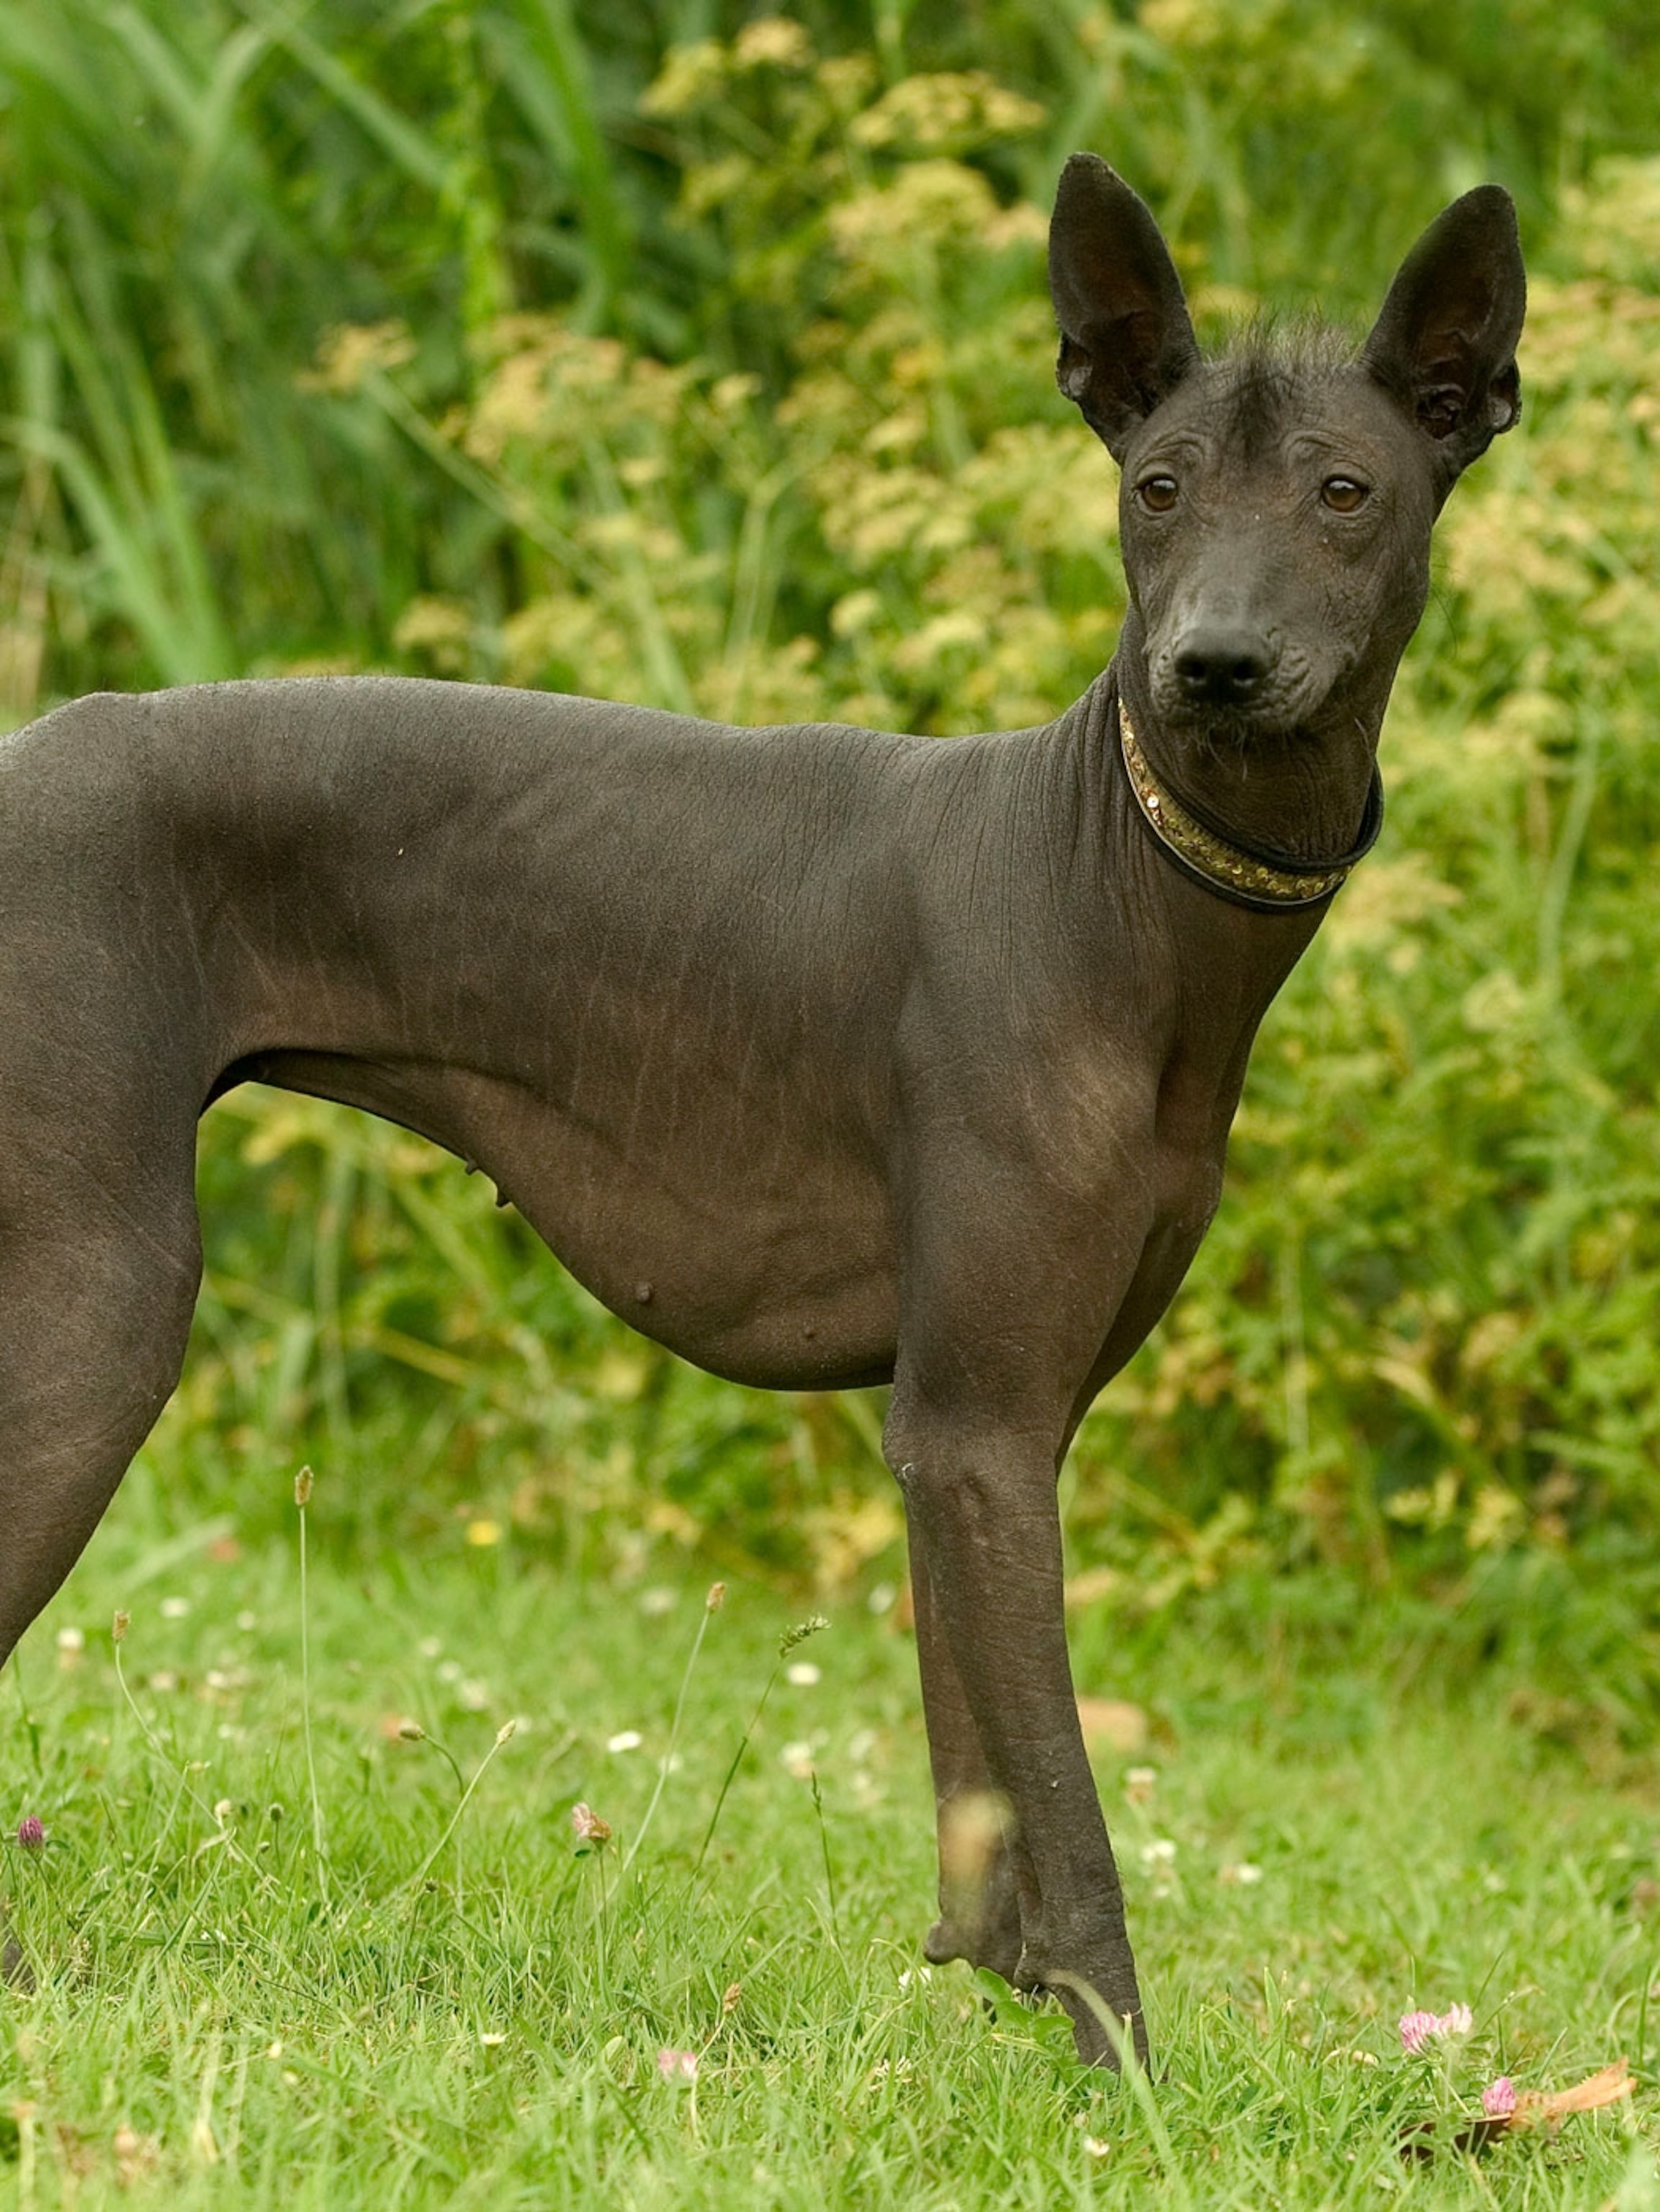 What is the history of the Hairless Dog?